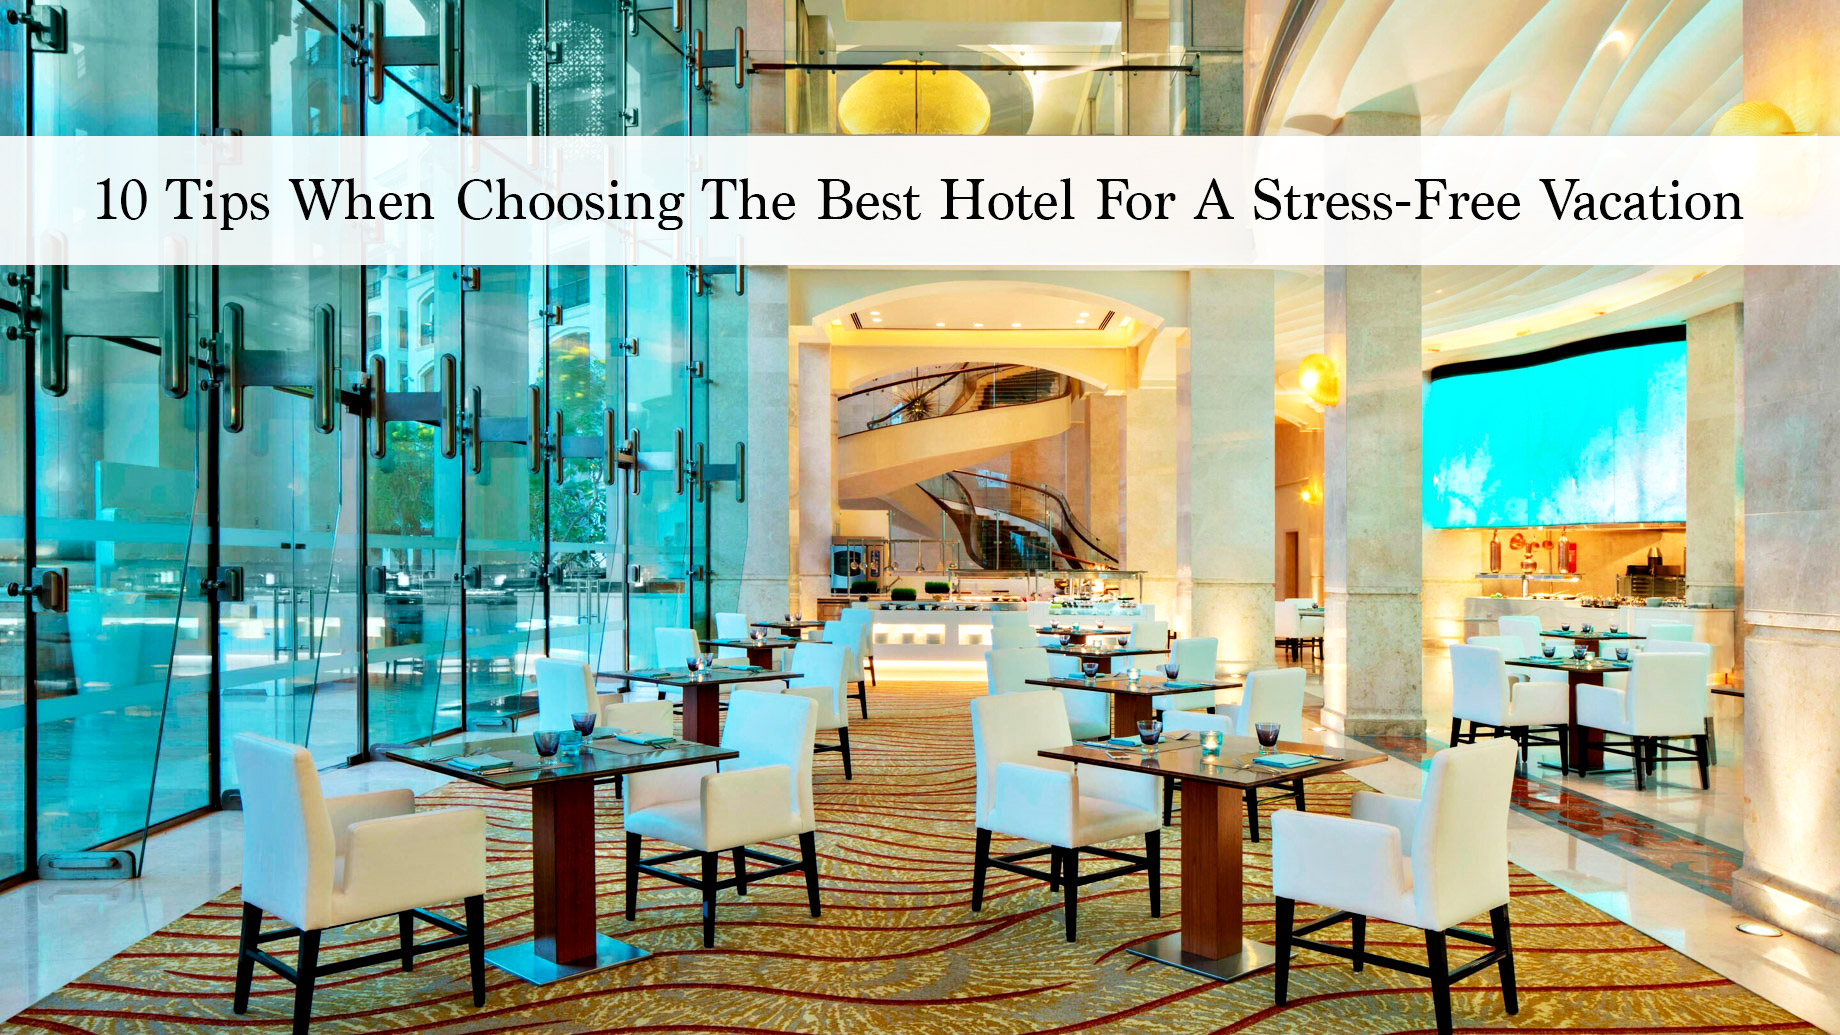 10 Tips When Choosing The Best Hotel For A Stress-Free Vacation